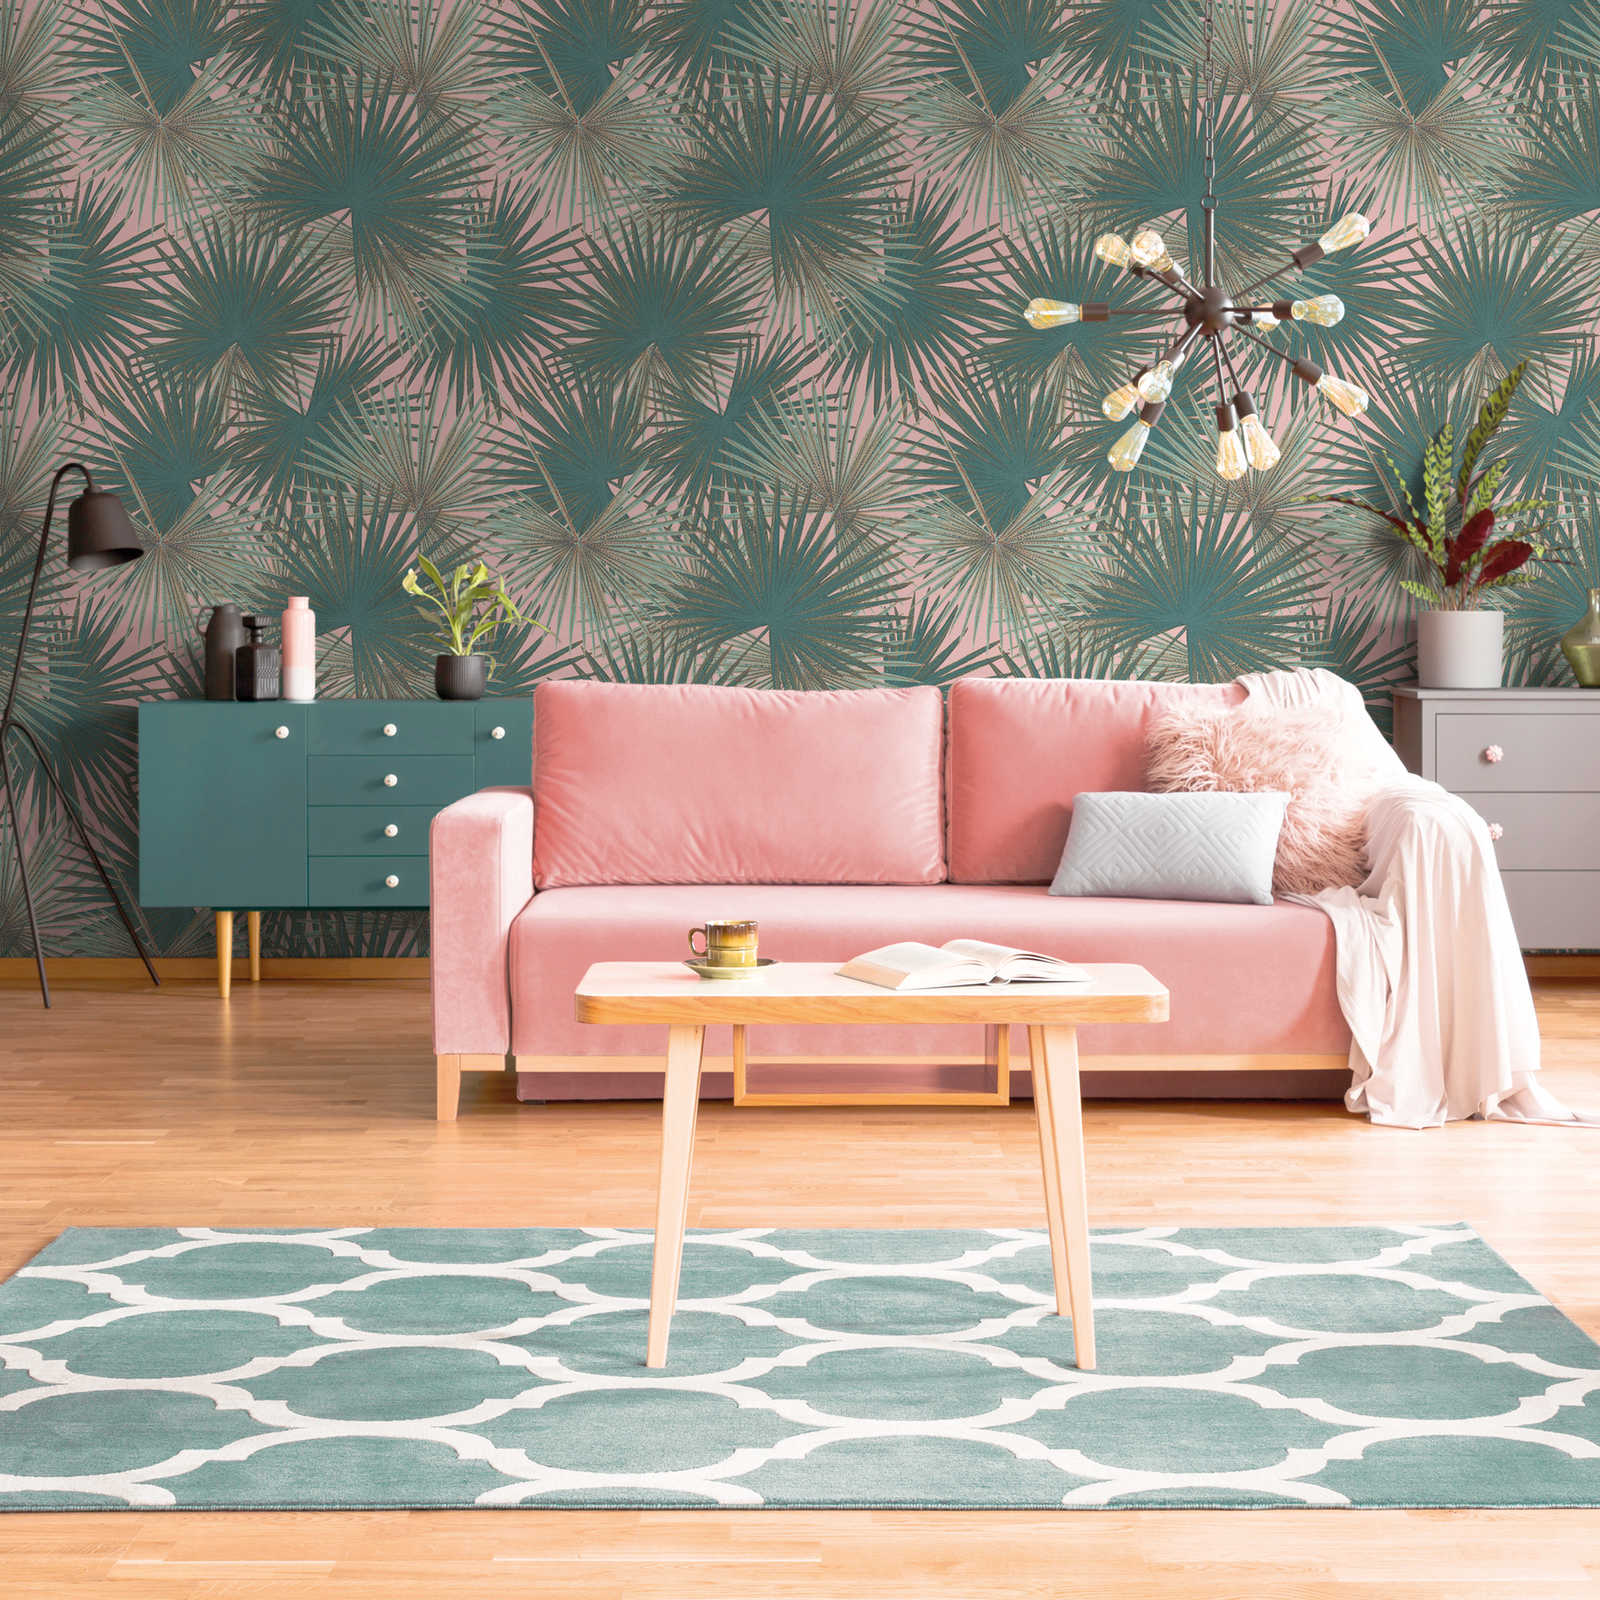 Leaf wallpaper with tropical plants - green, petrol, pink
